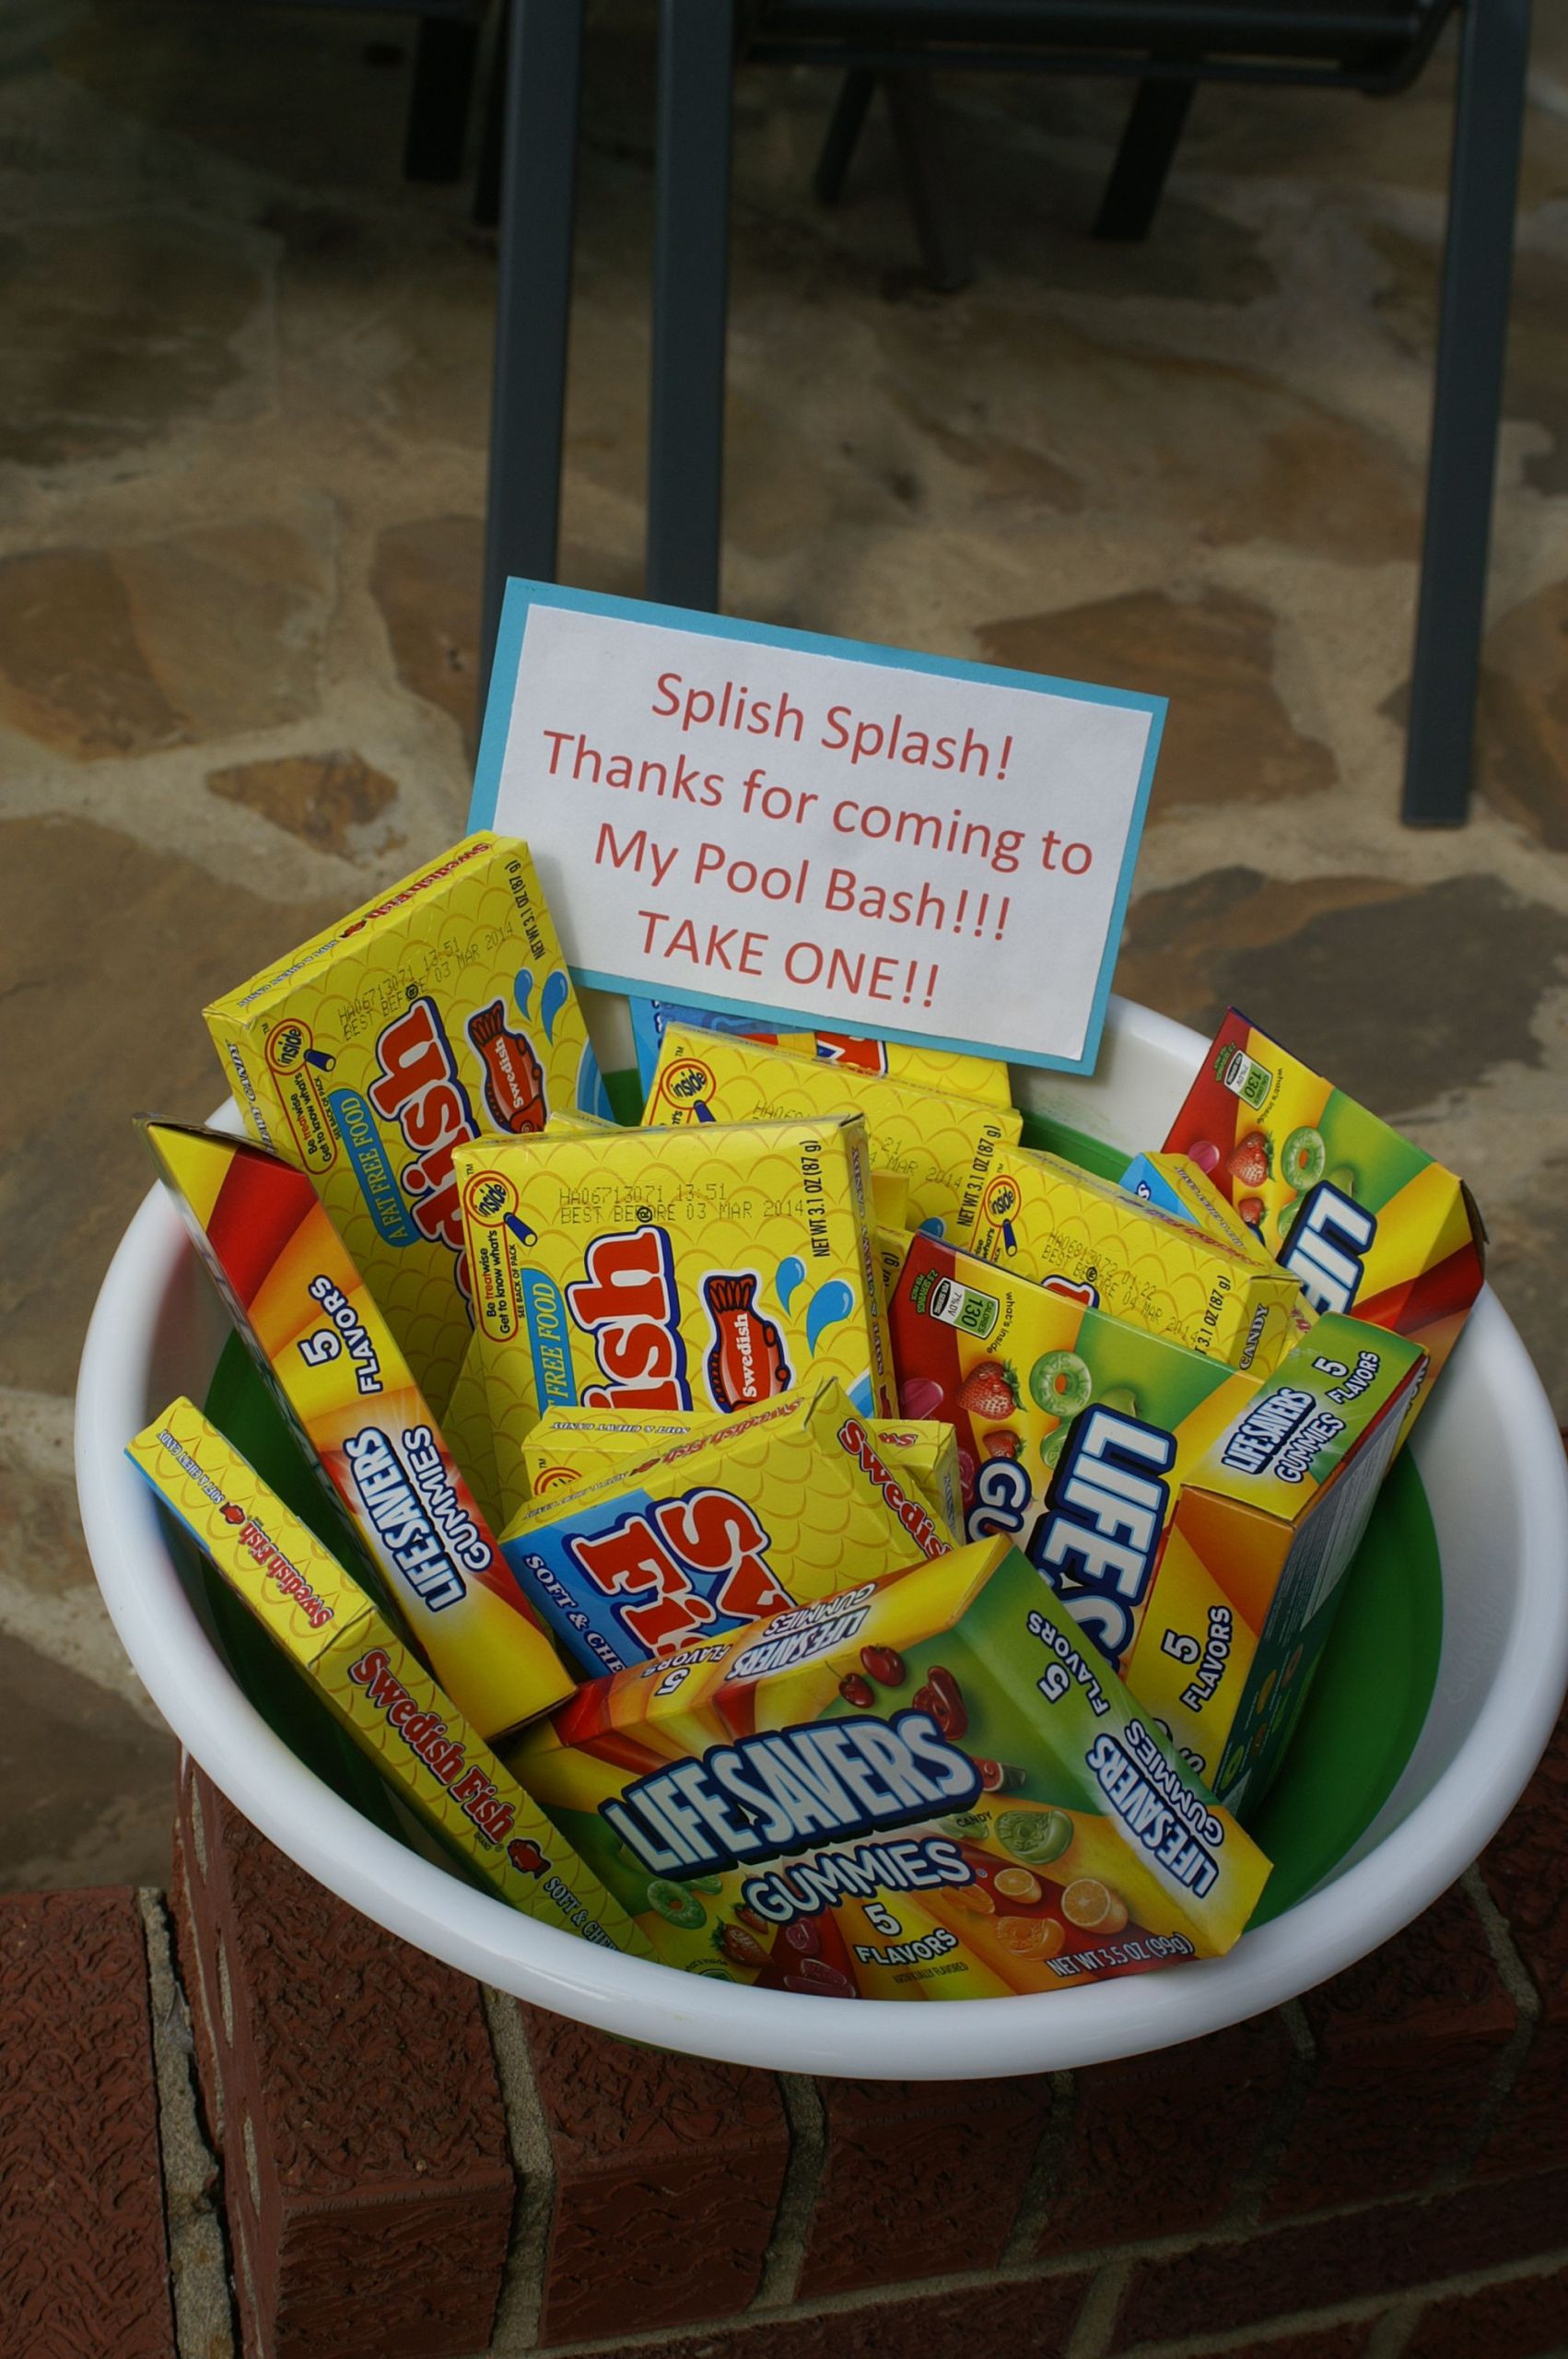 Kids Beach Party Favor Ideas
 party favors for pool beach party eping it simple